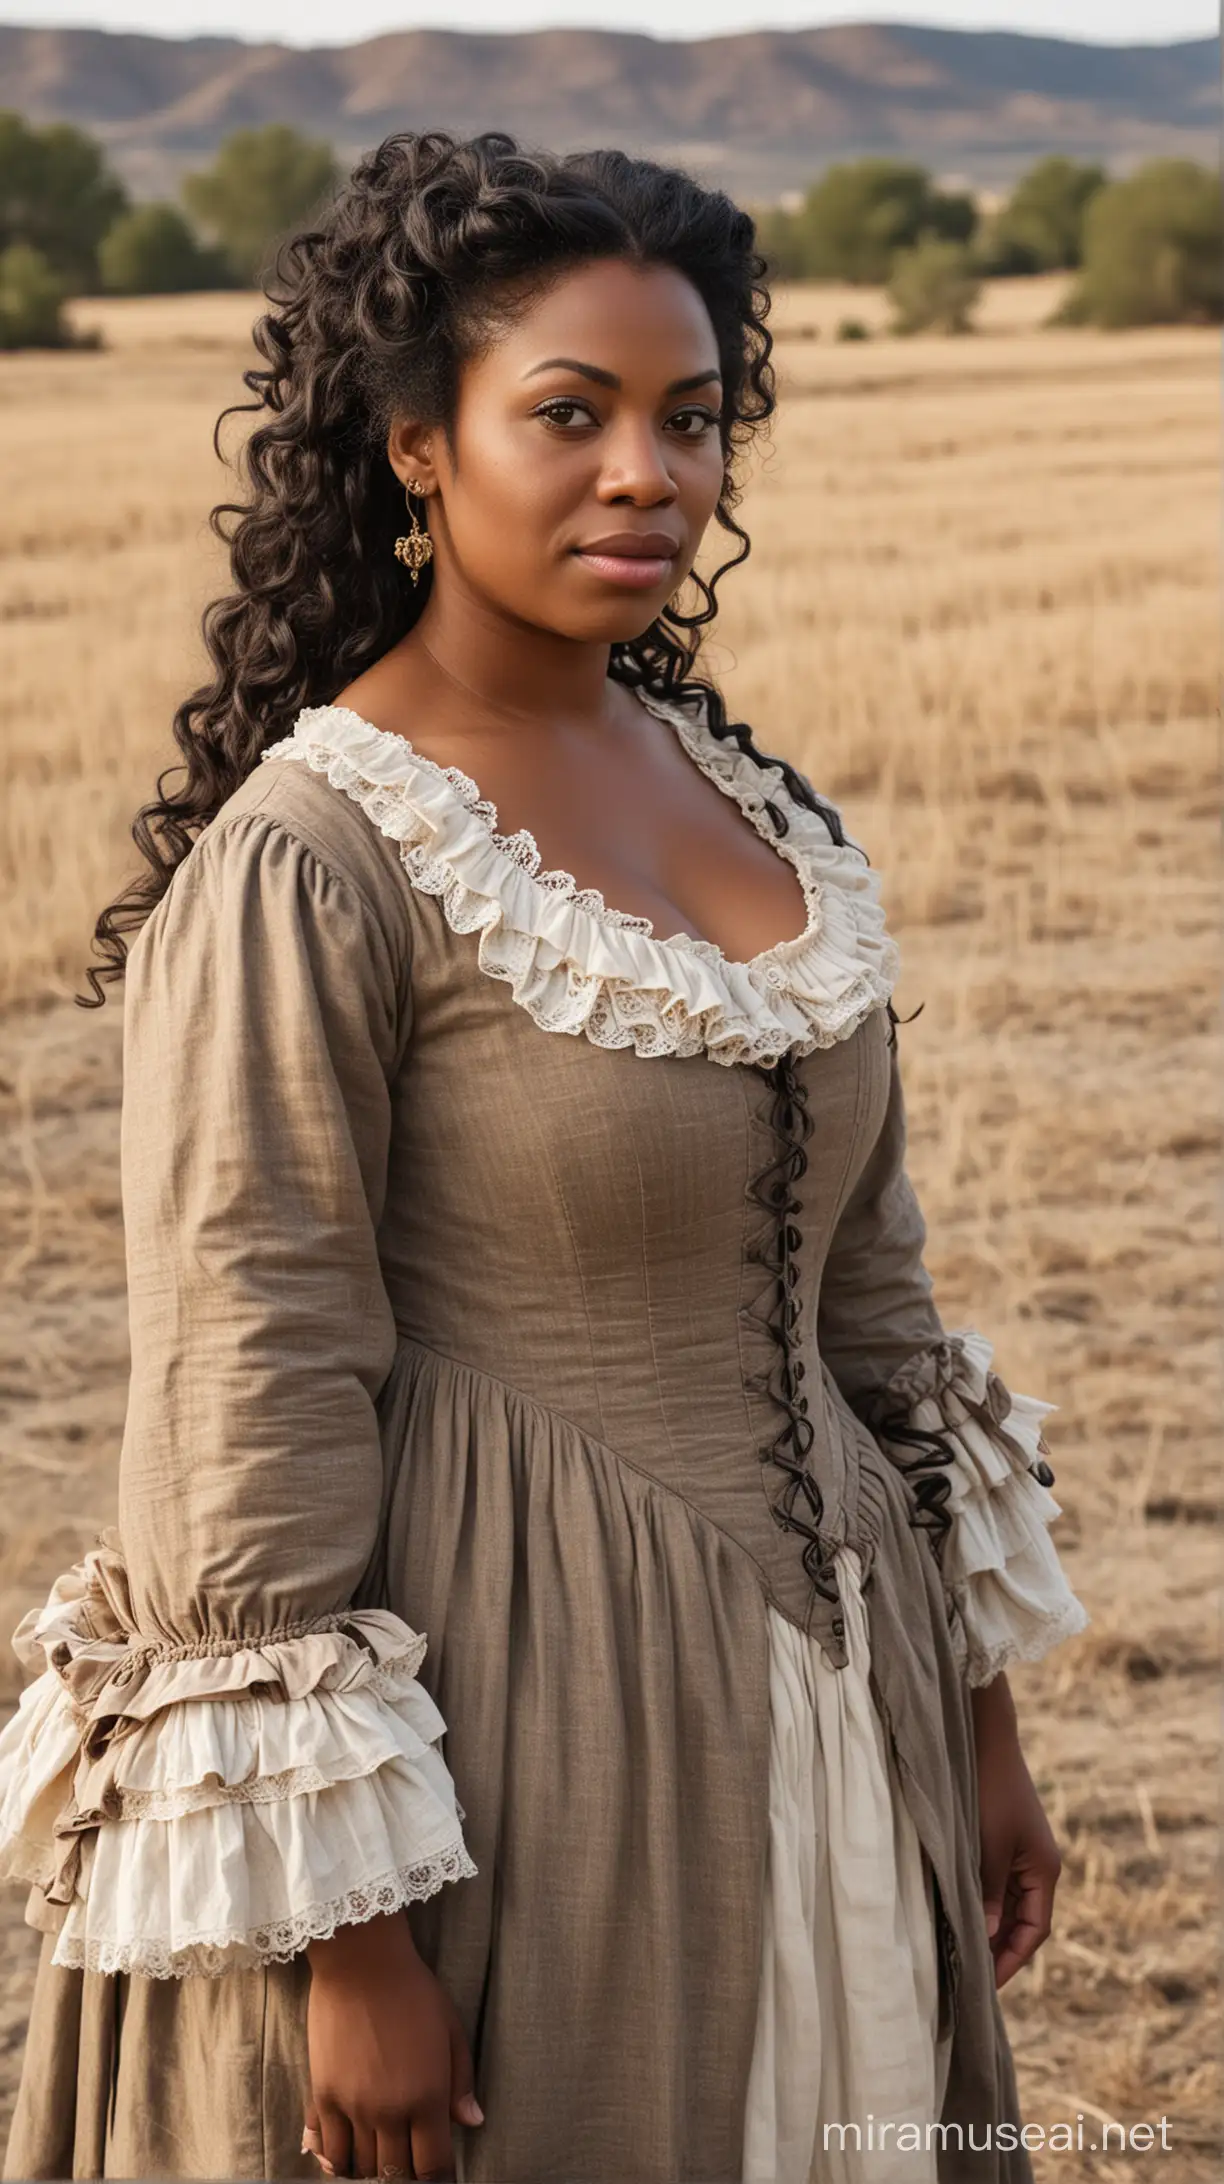 A 52 year old black fat woman with small eyes, small nose, wide lips, weak chin and long curly hair wearing dressed in 18th century american fashion and standing outside in a barren field in a west american village